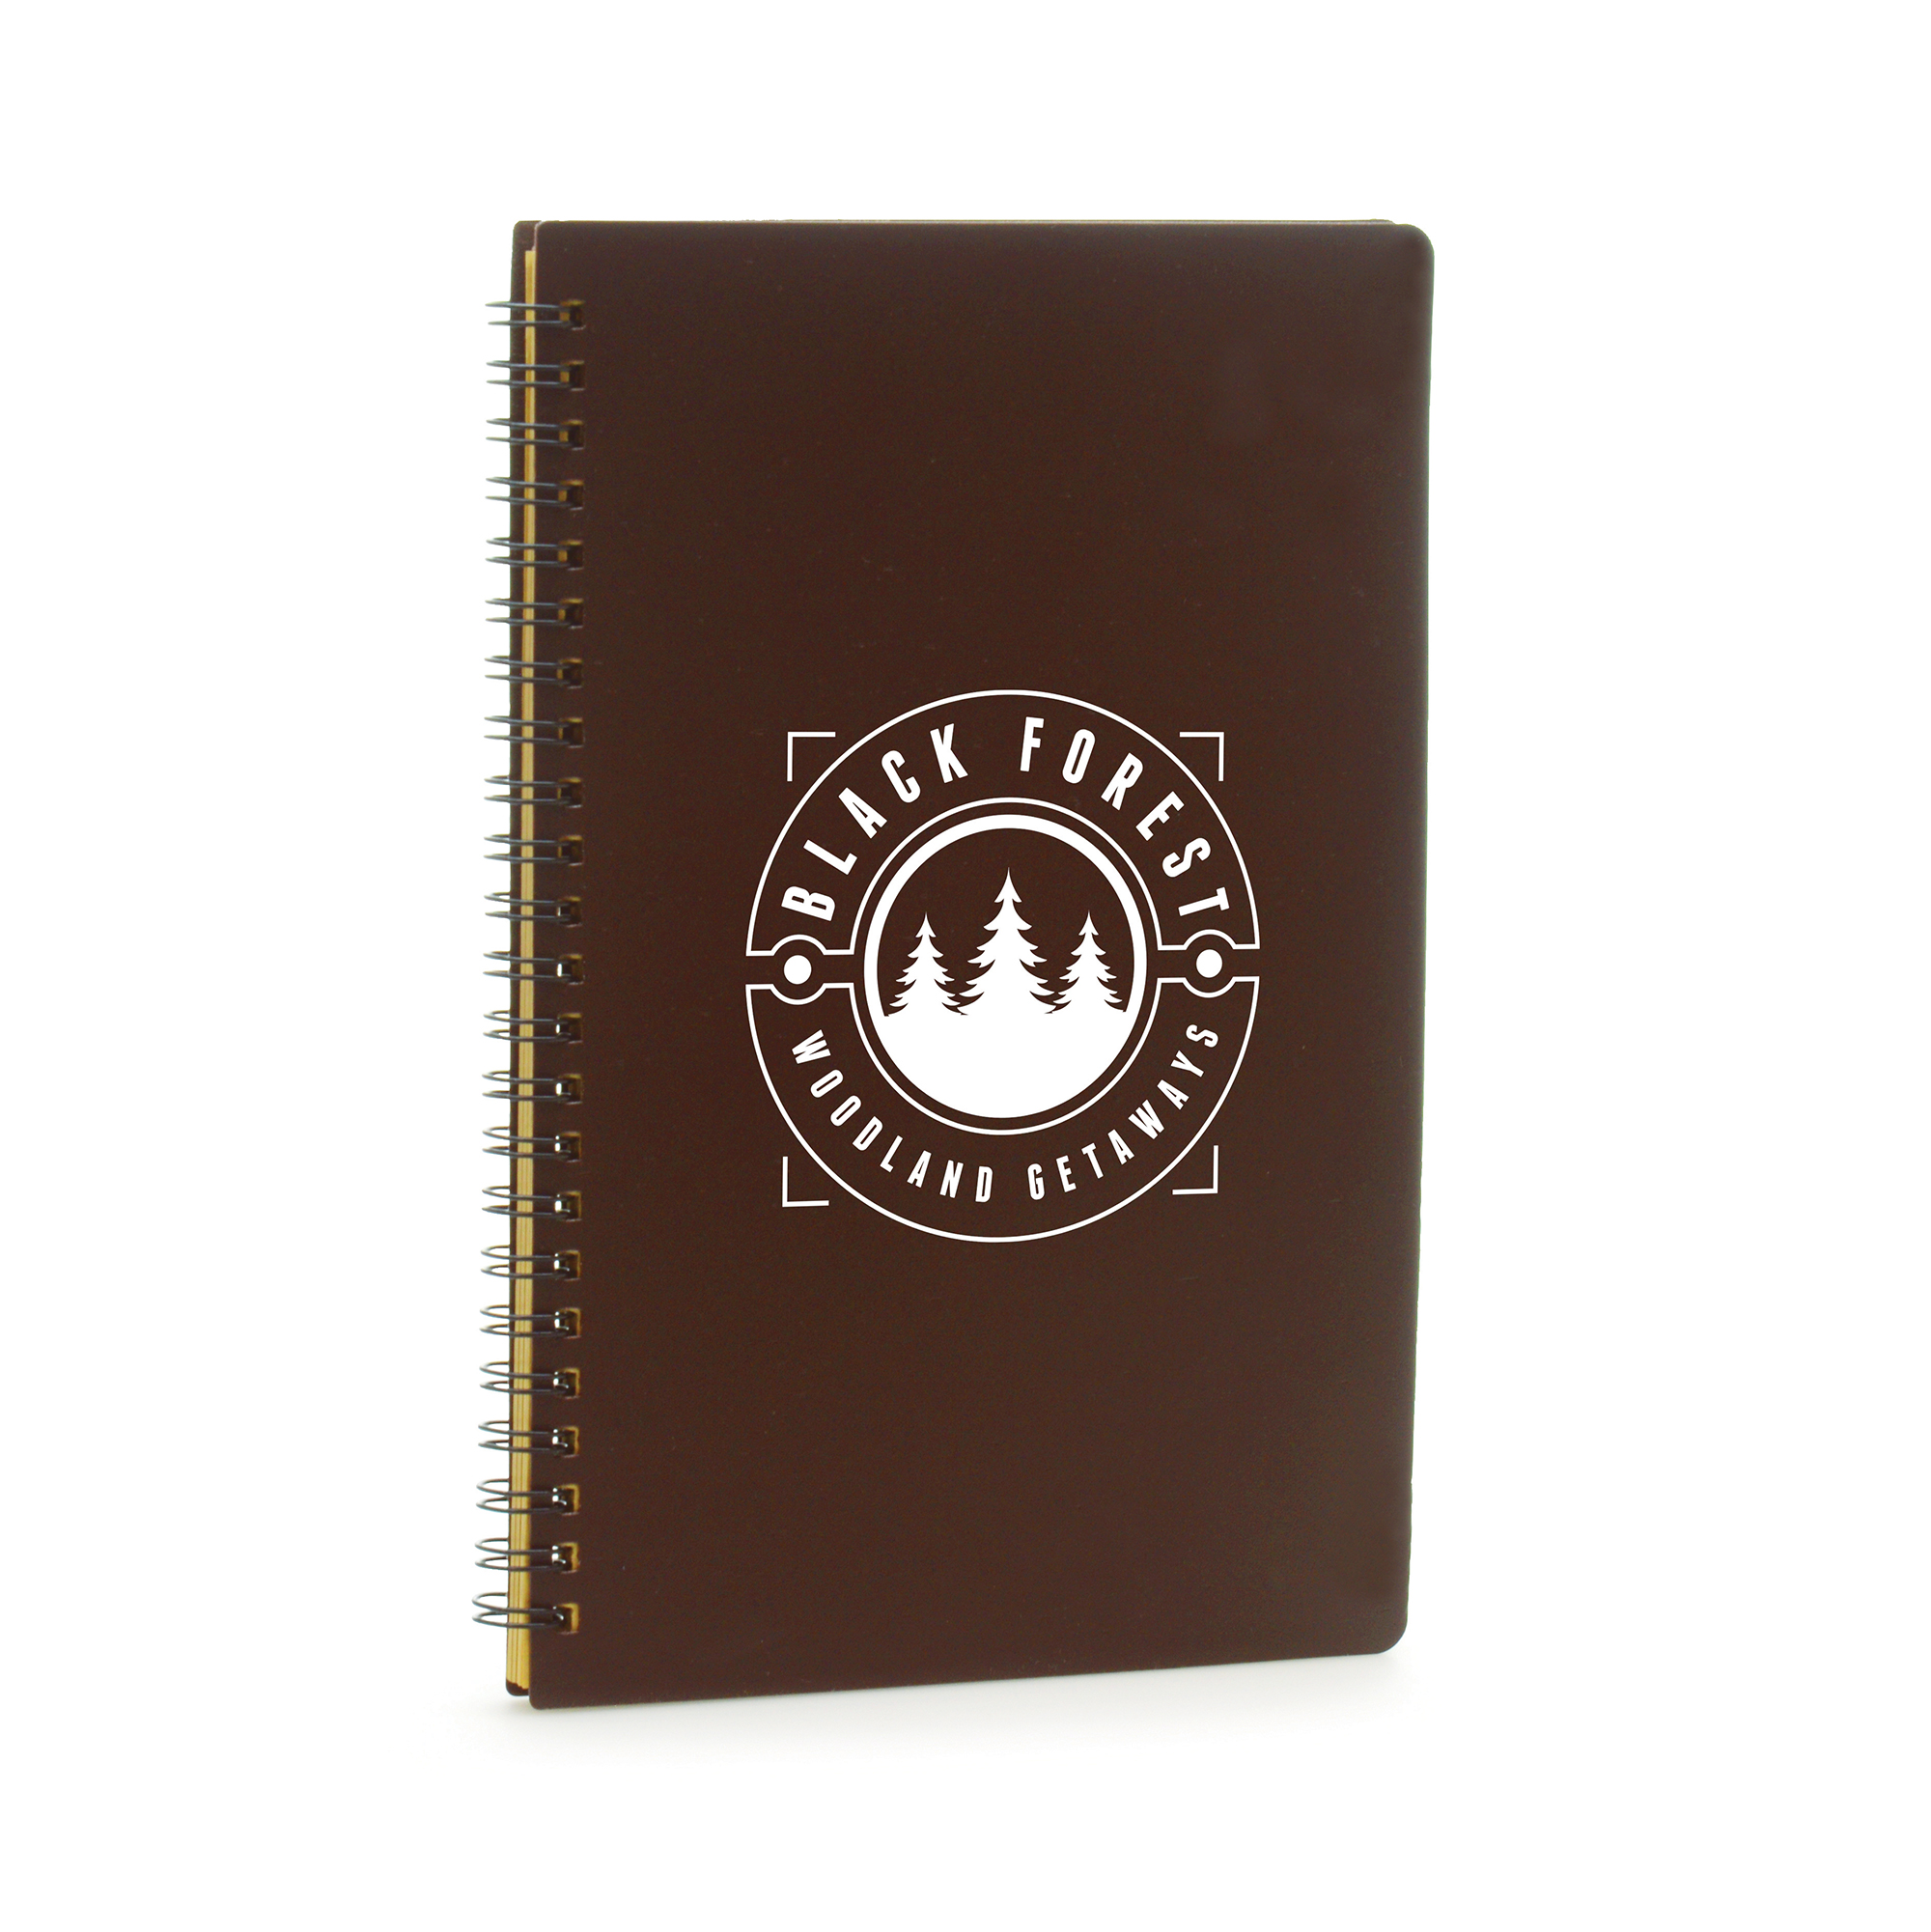 A5 spiral bound notebook with 70 lined sheets and eco-friendly cover made from 50% recycled coffee grinds and 50% PP plastic.